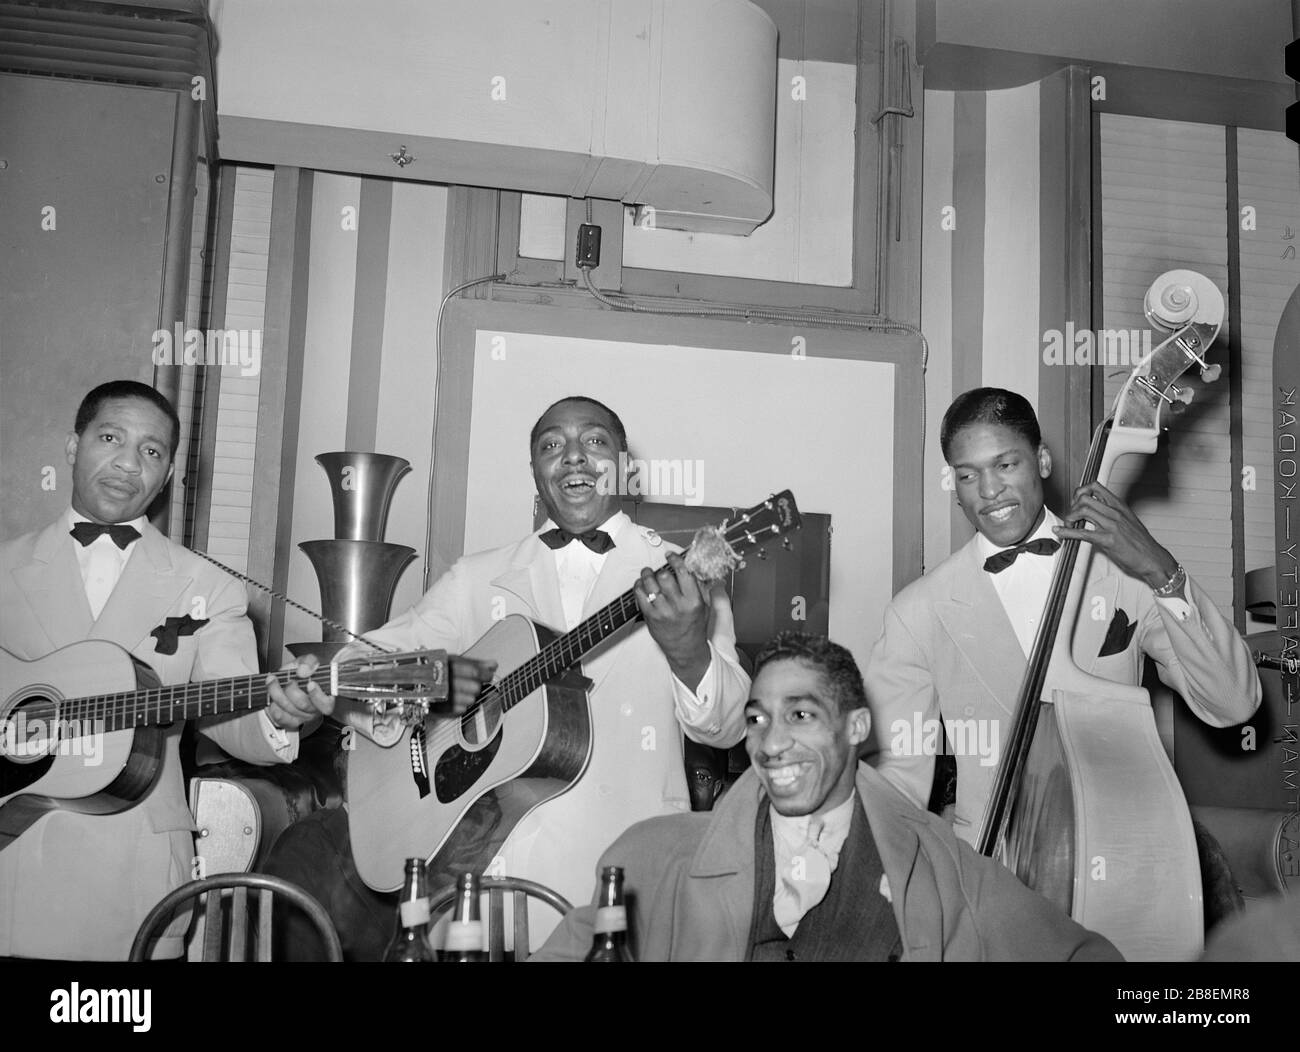 Musicians performing at Tavern, Chicago, Illinois, USA, Russell Lee for U.S. Farm Security Administration, April 1941 Stock Photo